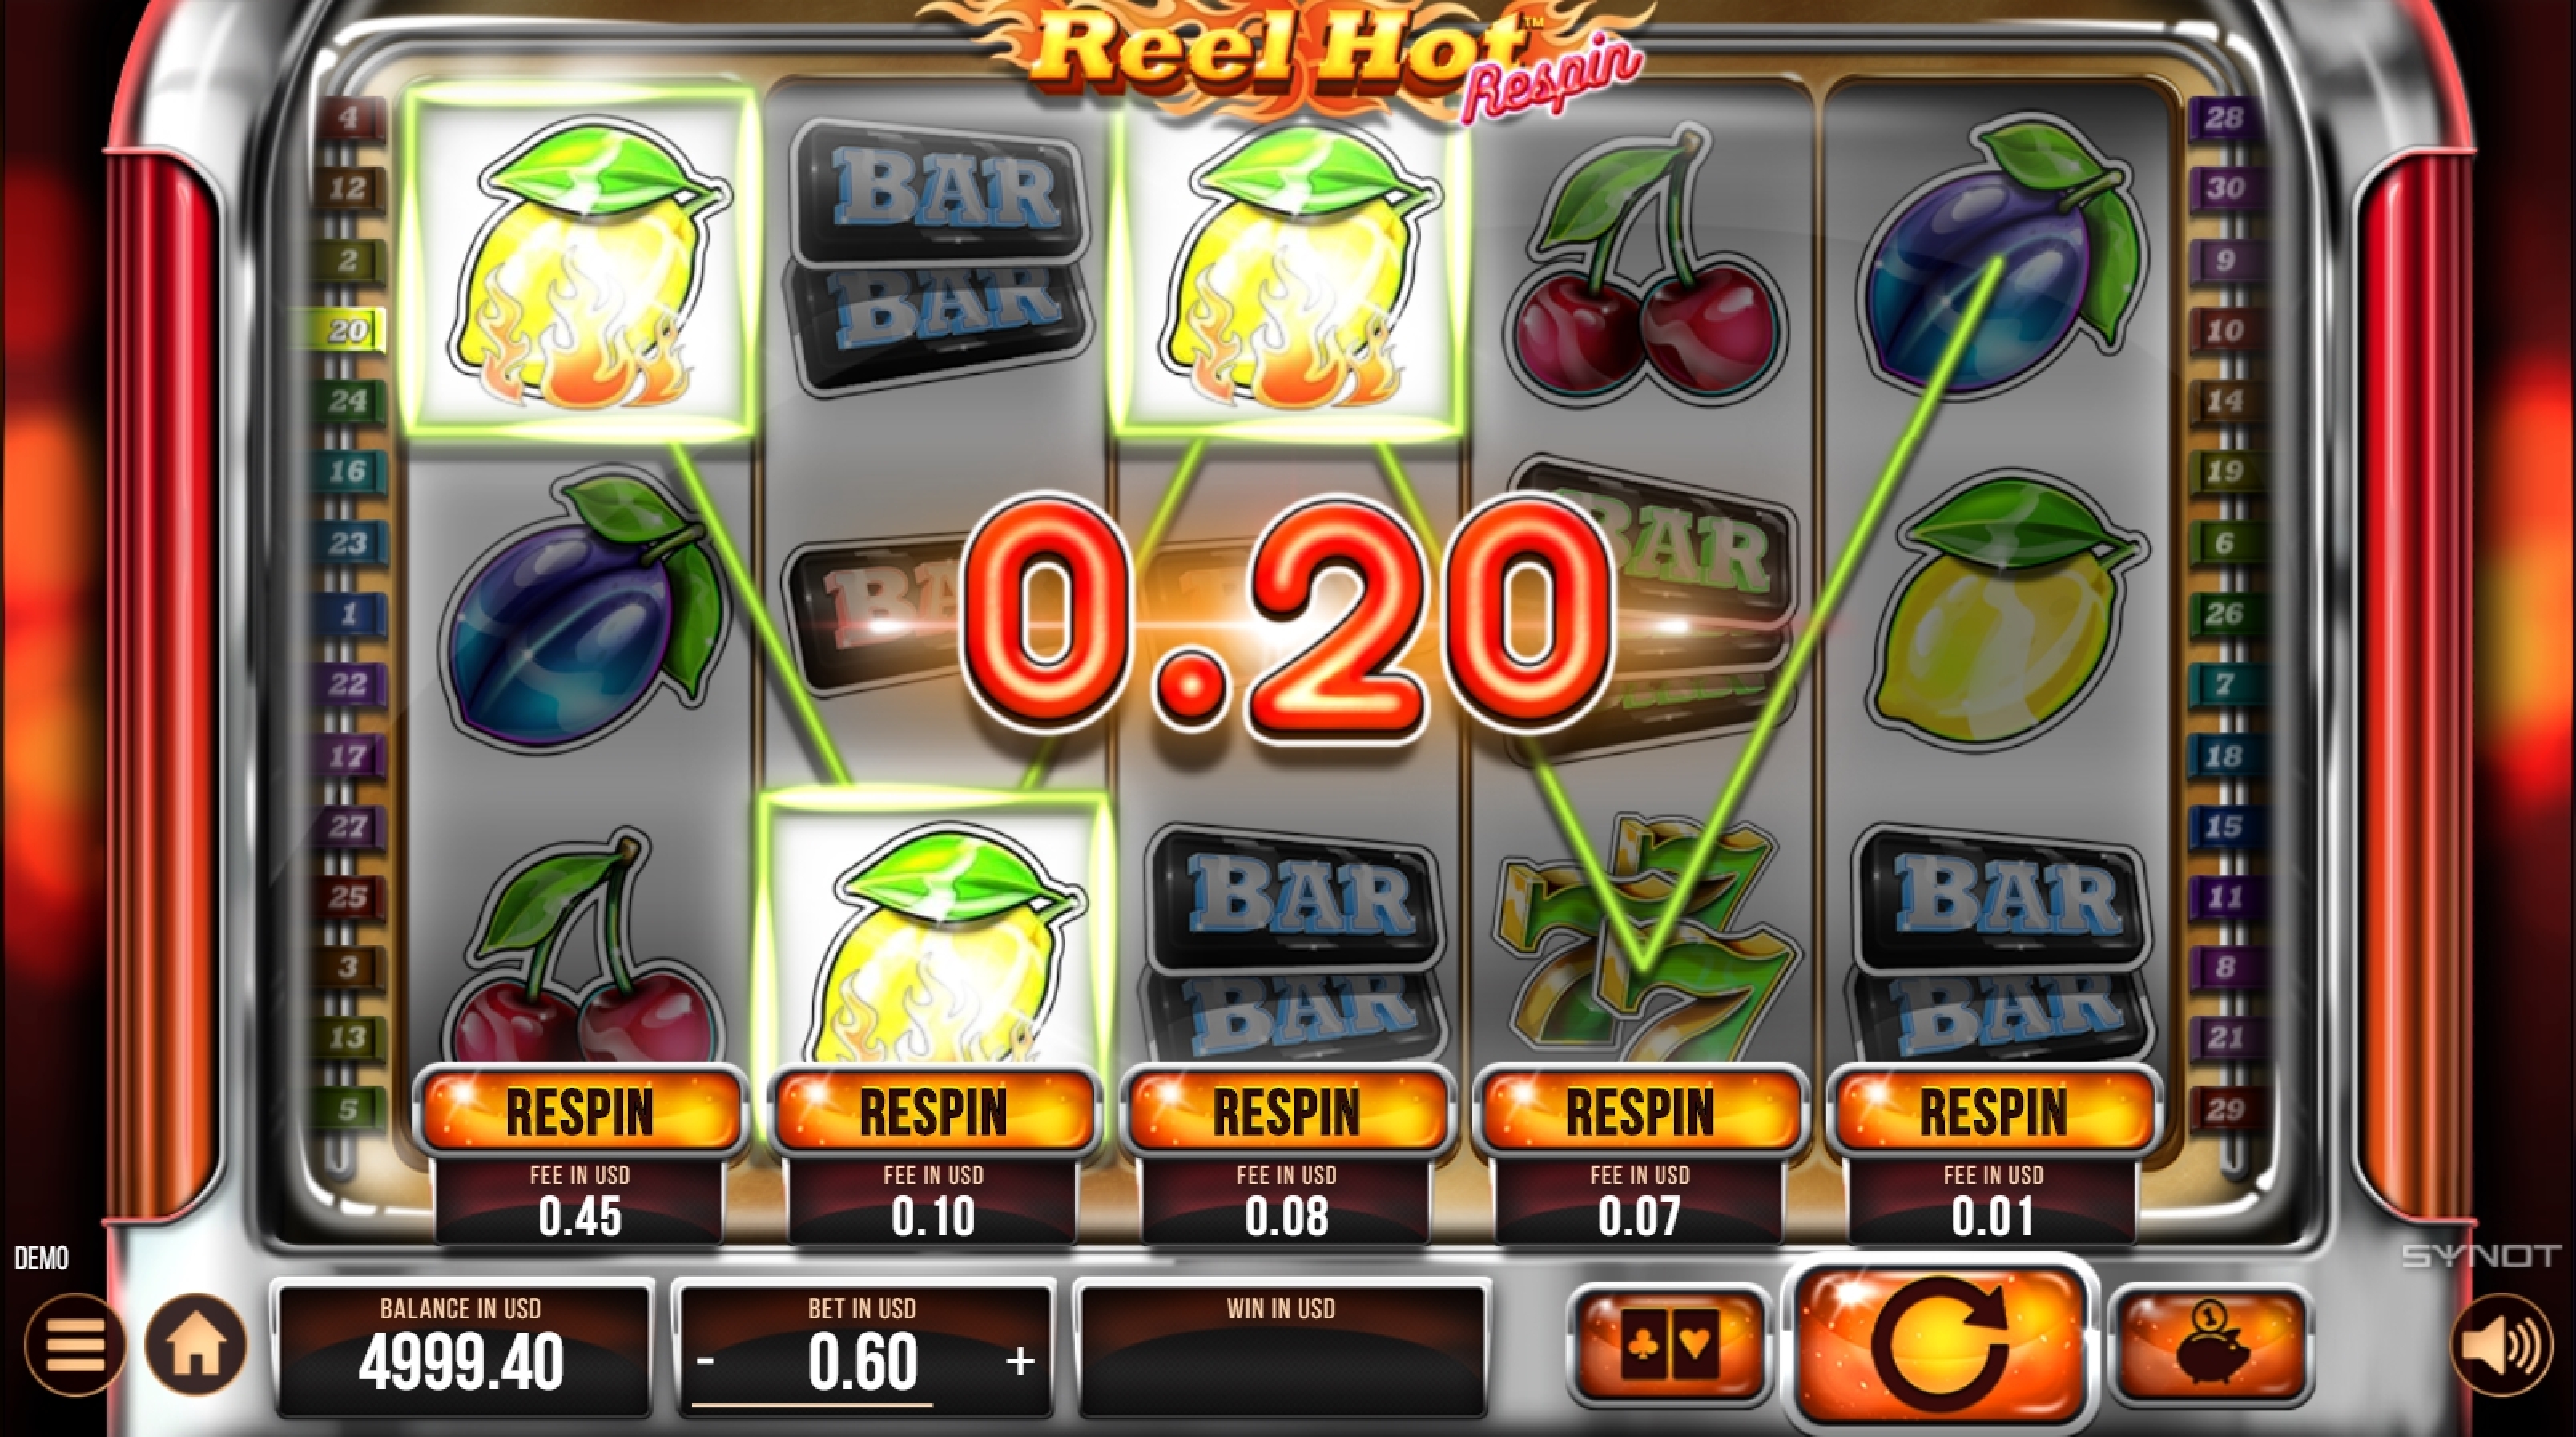 Win Money in Reel Hot Respin Free Slot Game by Synot Games